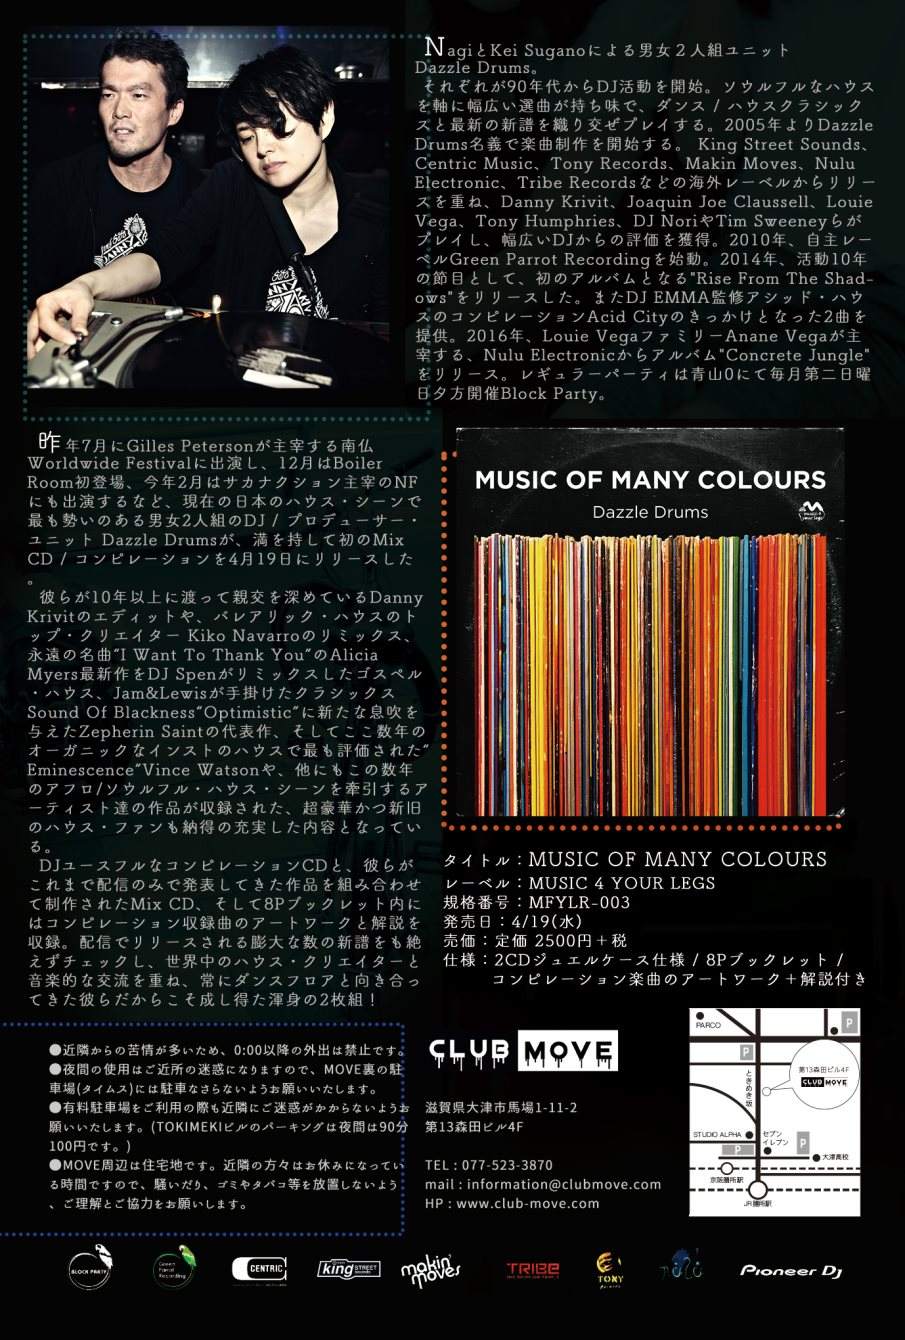 Dazzle Drums -Music Of Many Colours- Release Party Meets Feel -踊- Special - フライヤー裏